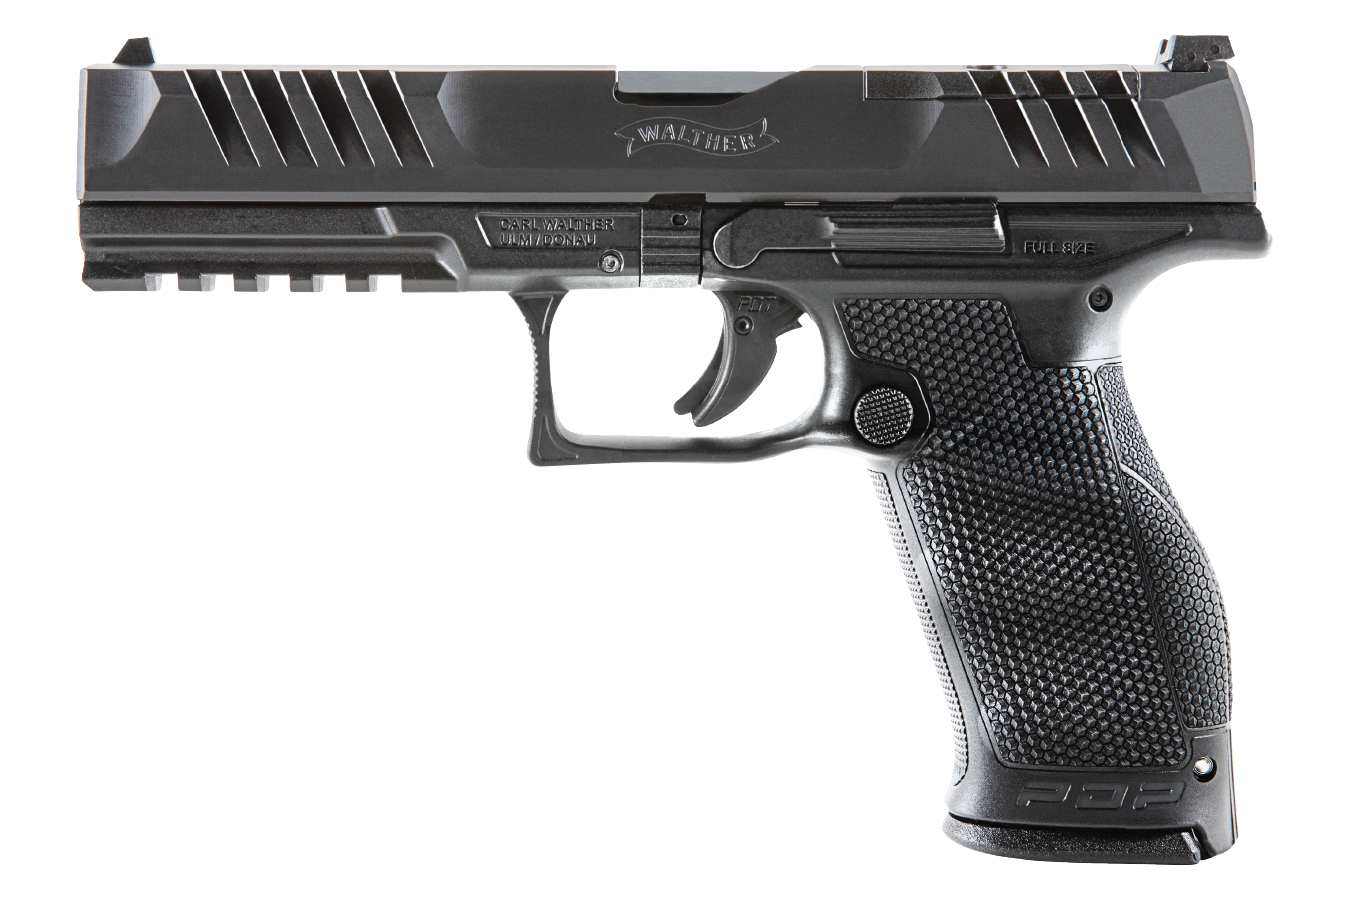 PDP FULL-SIZE OPTICS READY STRIKER-FIRED PISTOL WITH 5 INCH BARREL